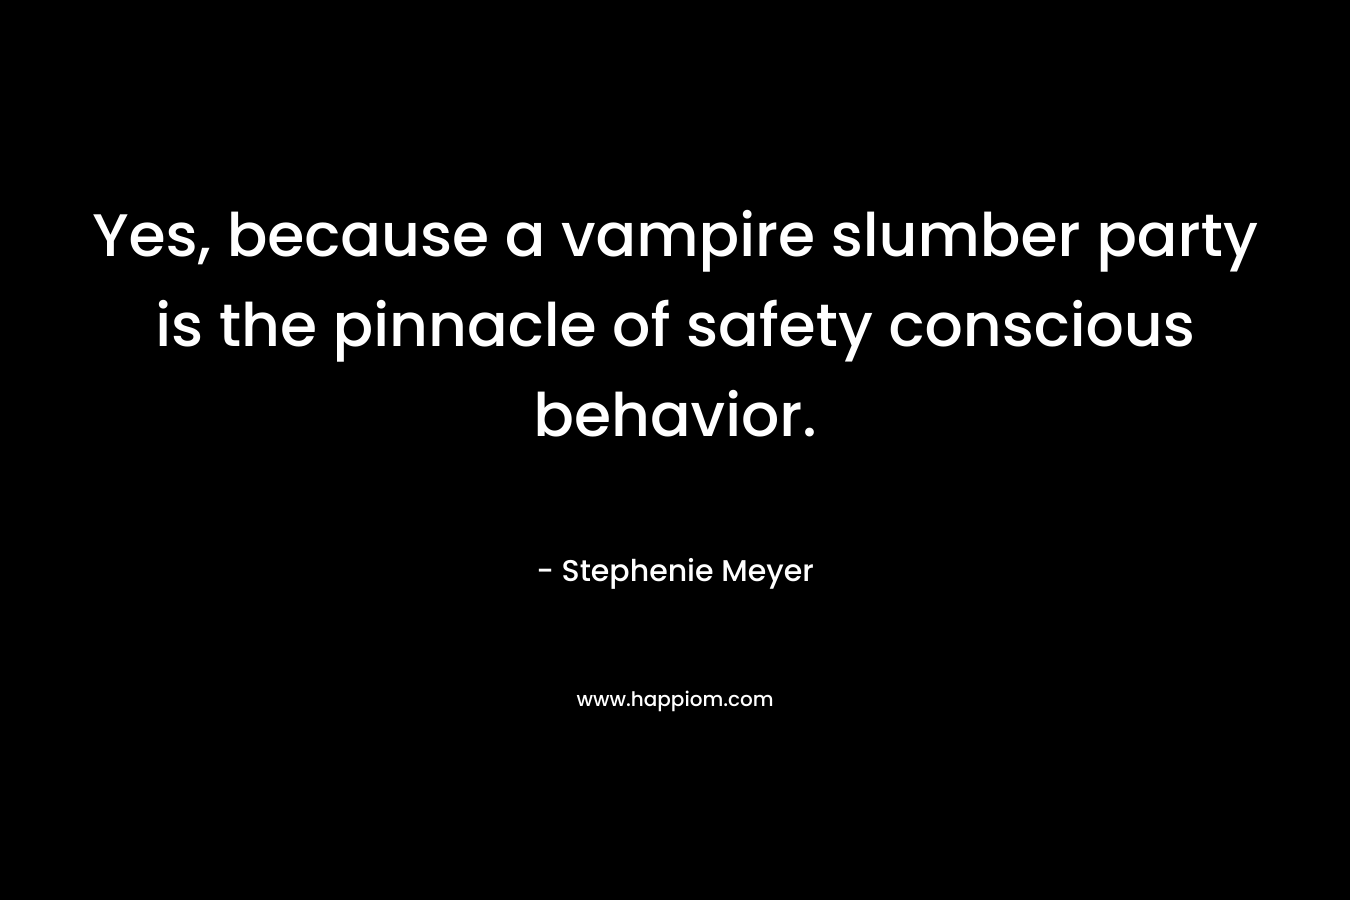 Yes, because a vampire slumber party is the pinnacle of safety conscious behavior.